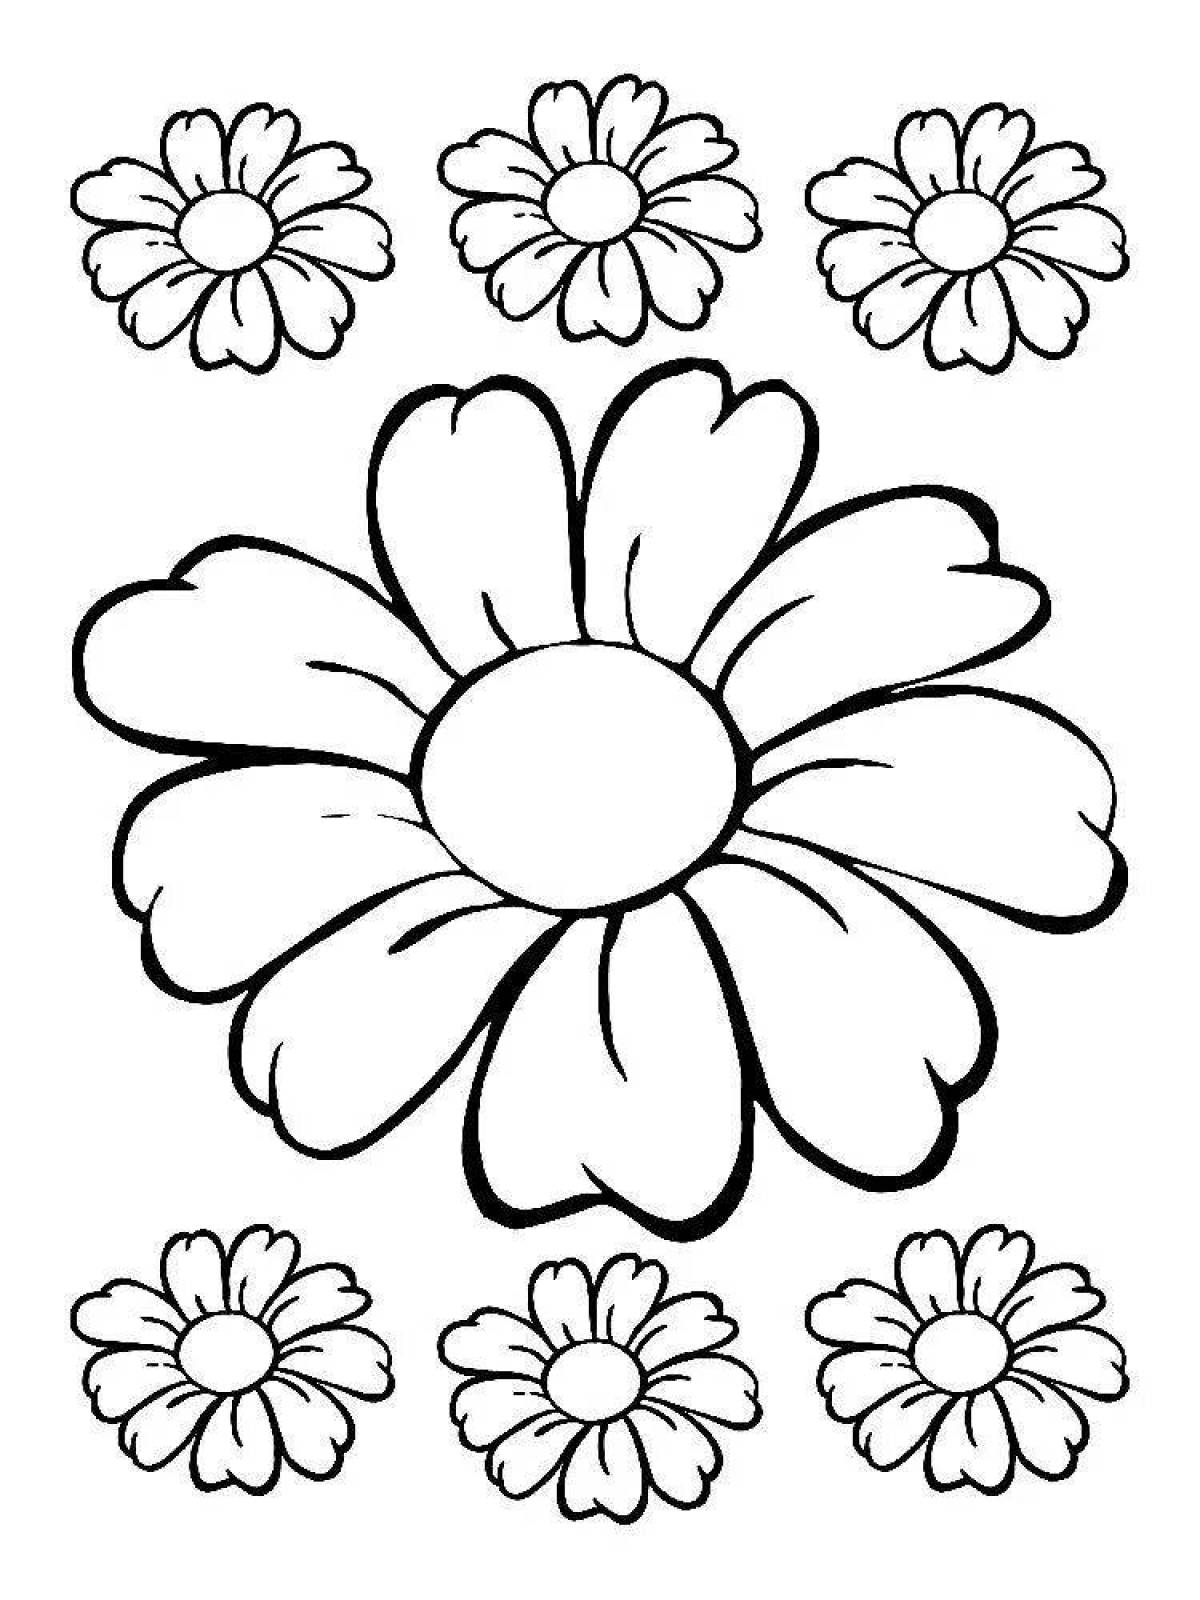 Coloring page nice flower pattern